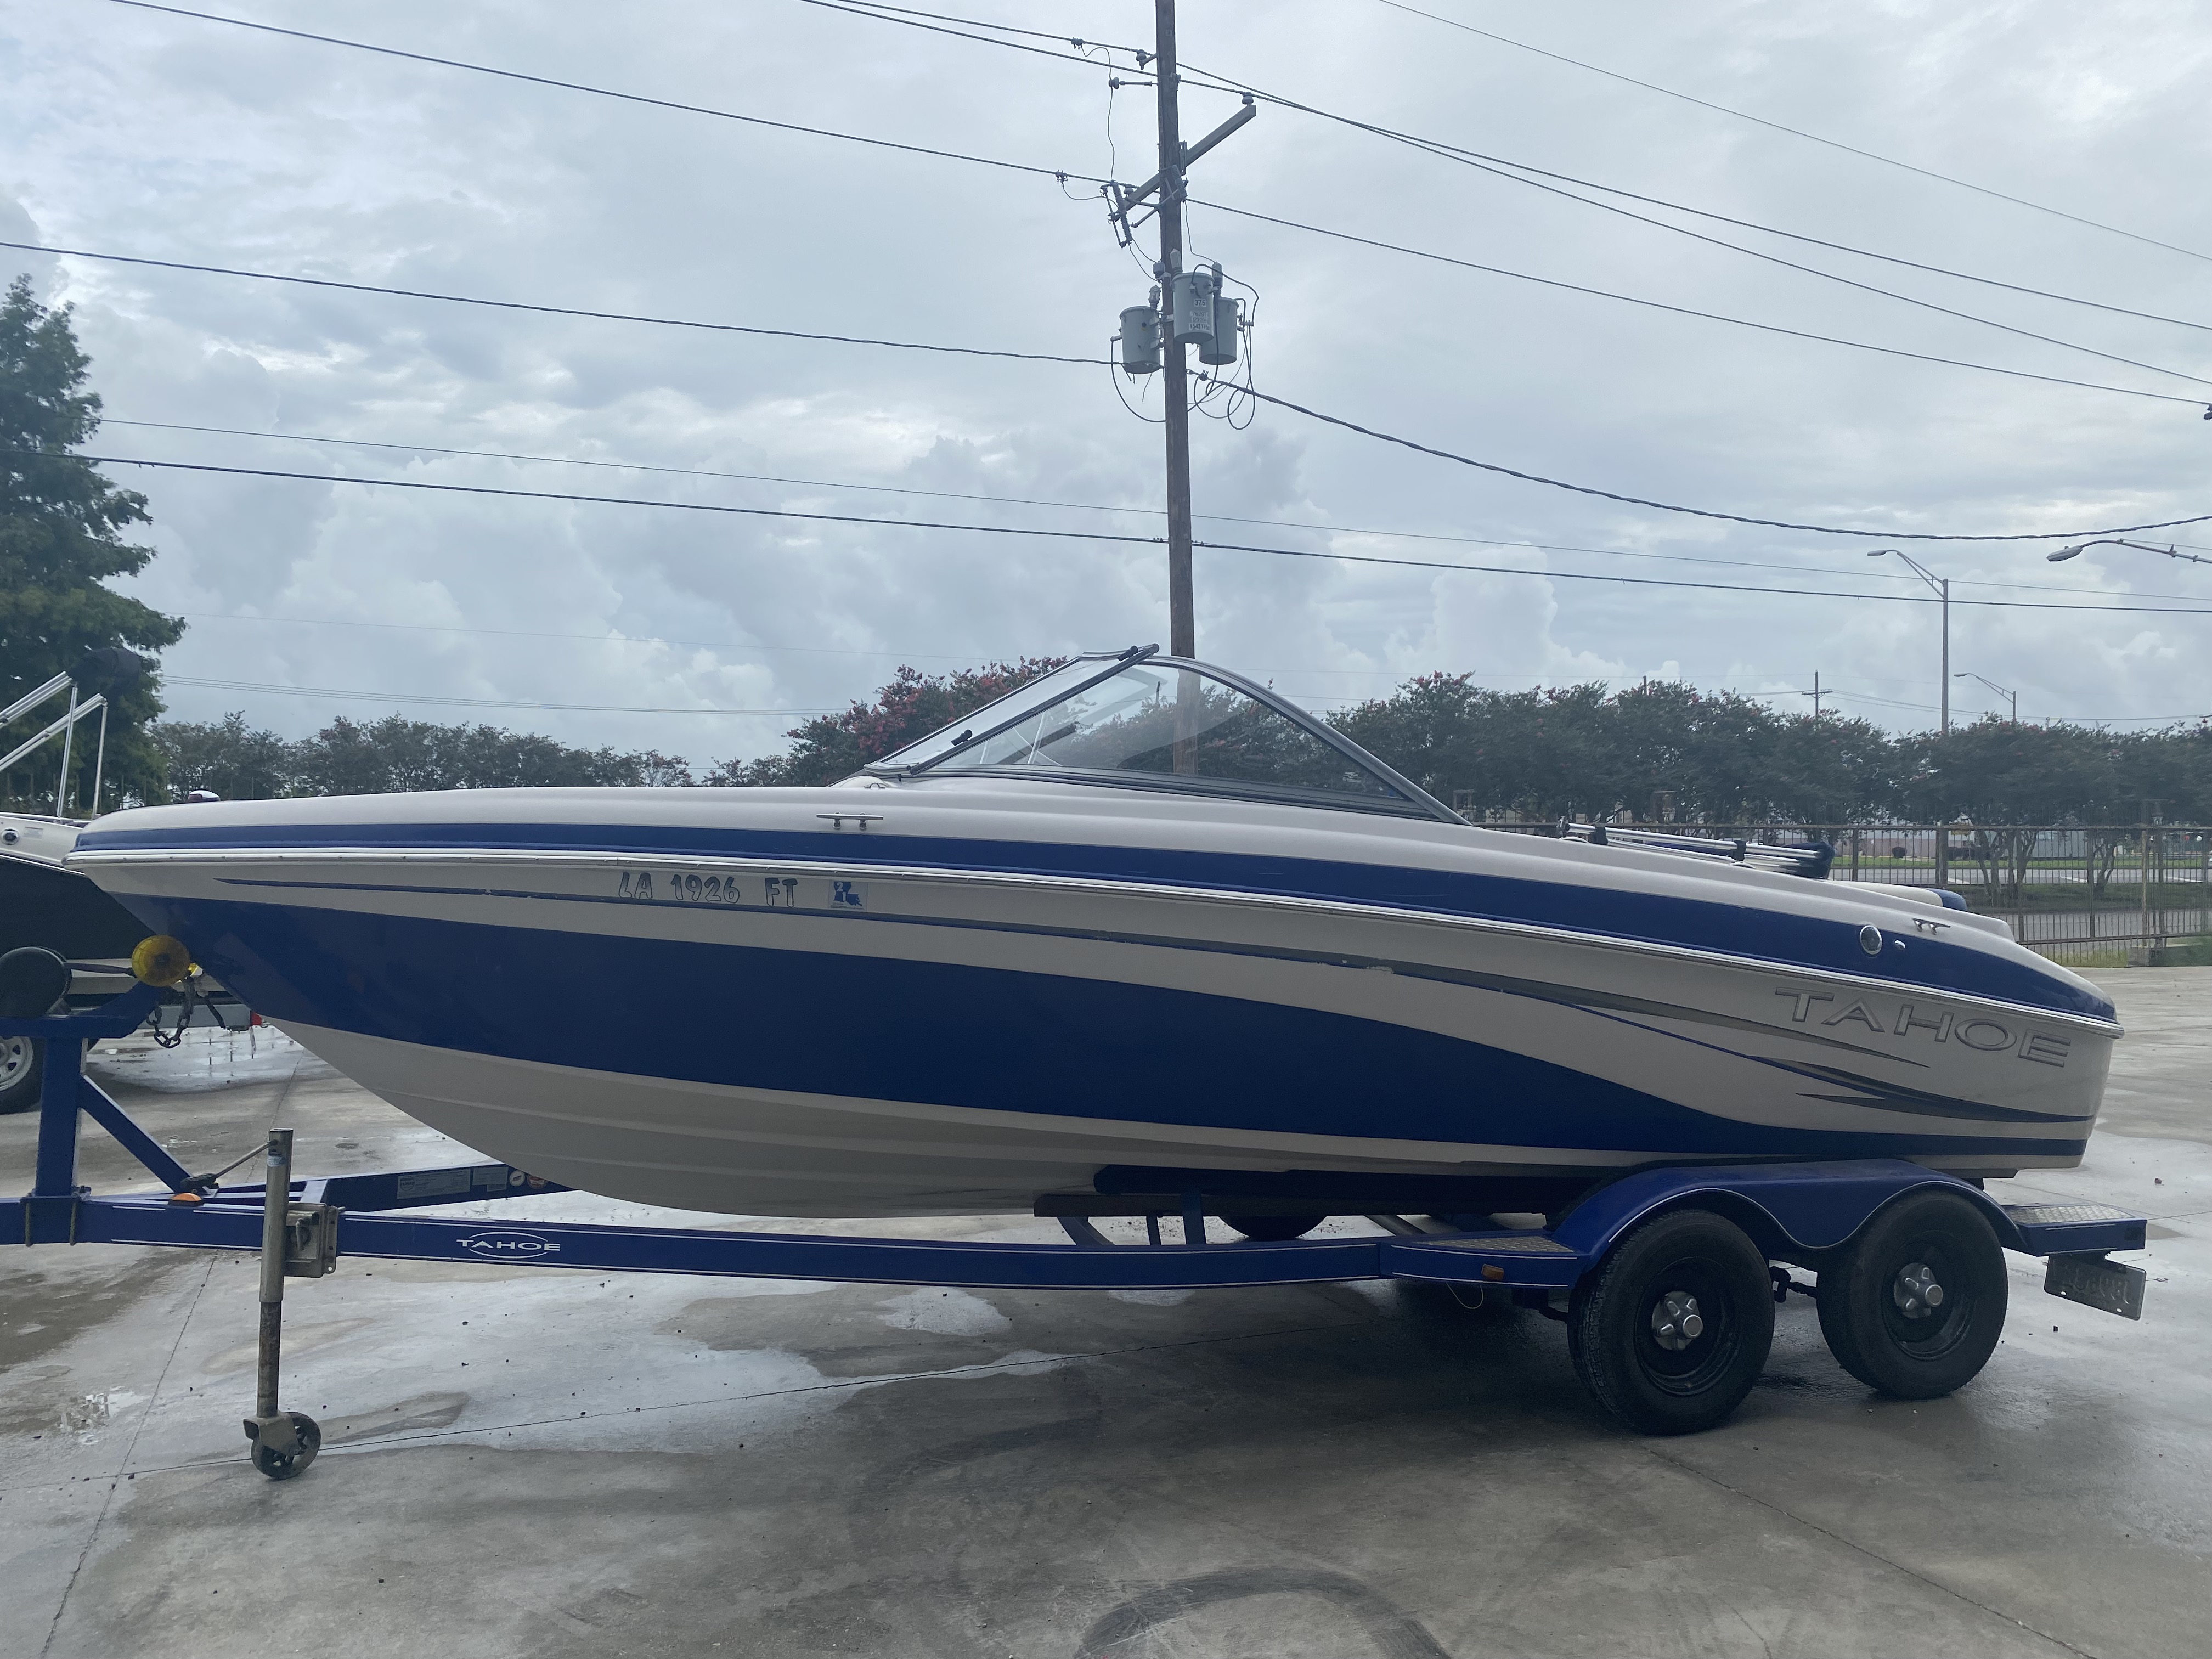 2008 Tahoe boat for sale, model of the boat is Q6 & Image # 8 of 10